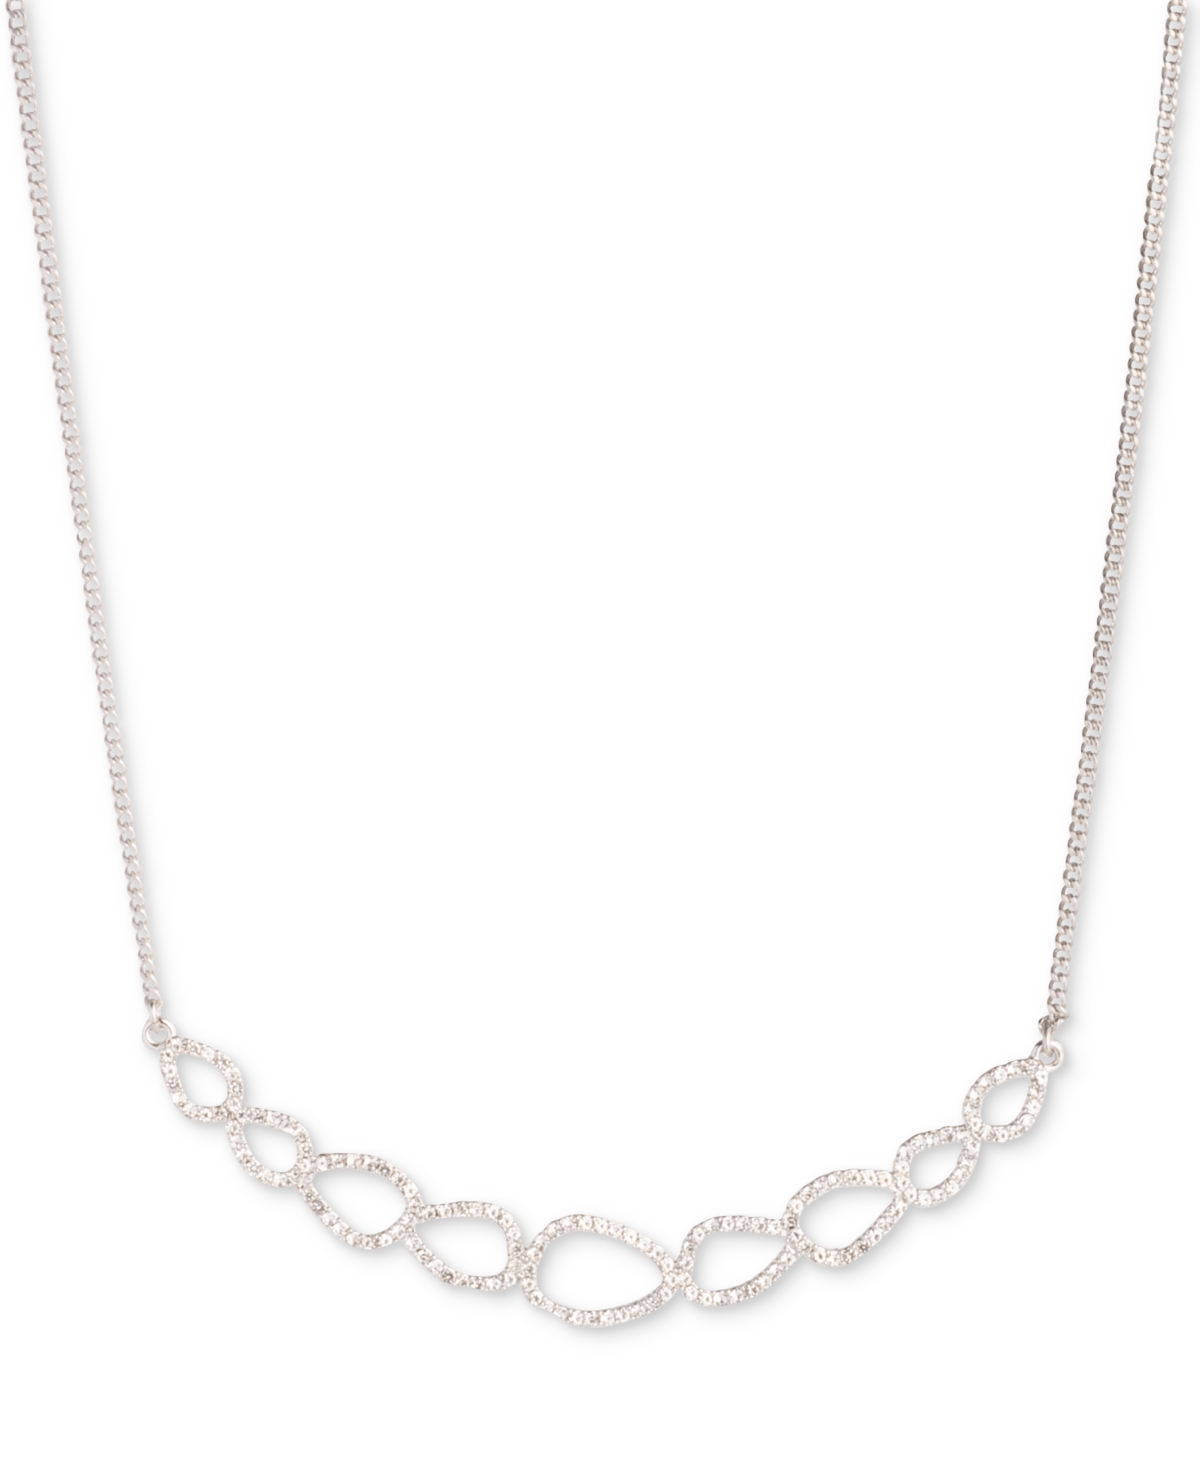 Silver-Tone Crystal Open Frontal Necklace, 16" + 3" extender - White